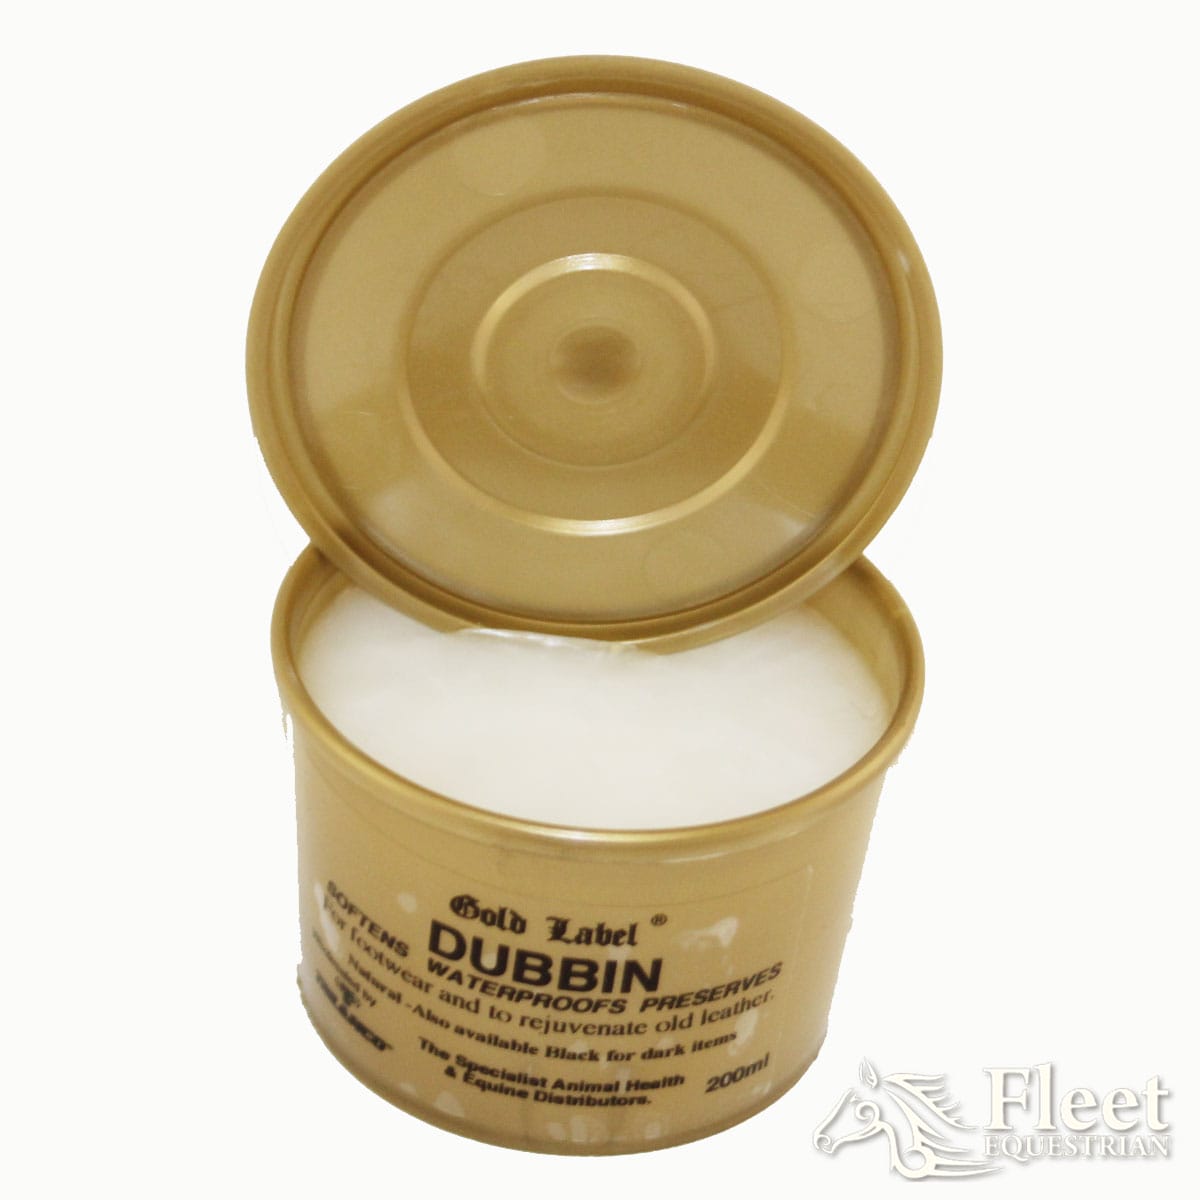 WATERPROOFS AND SOFTENS LEATHER BLACK GOLD LABEL DUBBIN 200G 